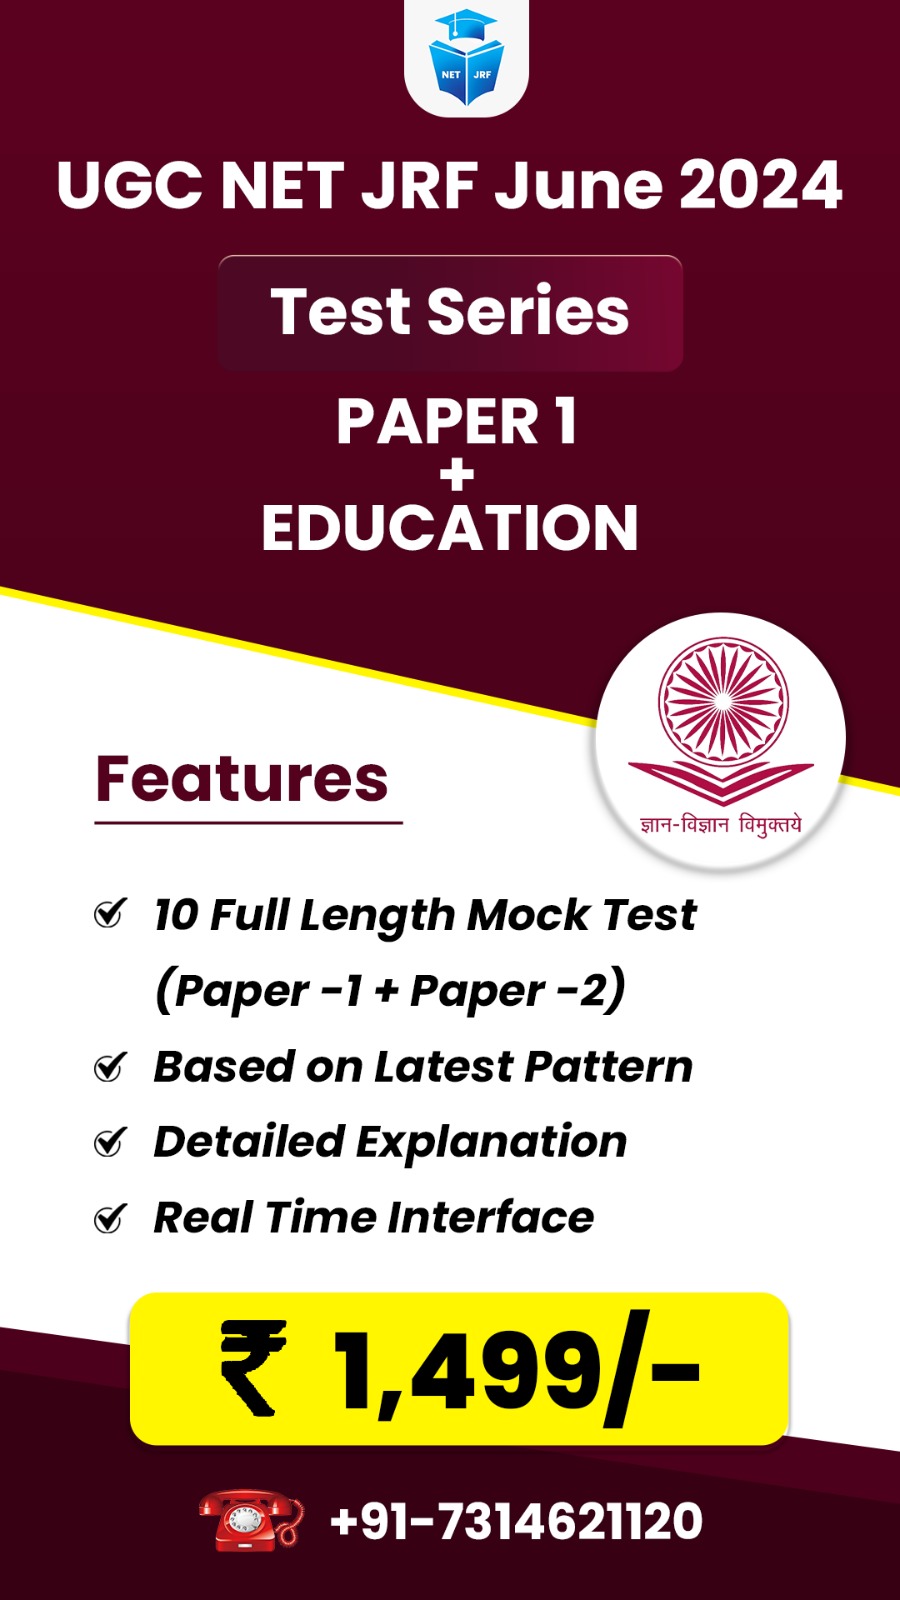 Education (Paper 1 + Paper 2) Test Series for June 2024